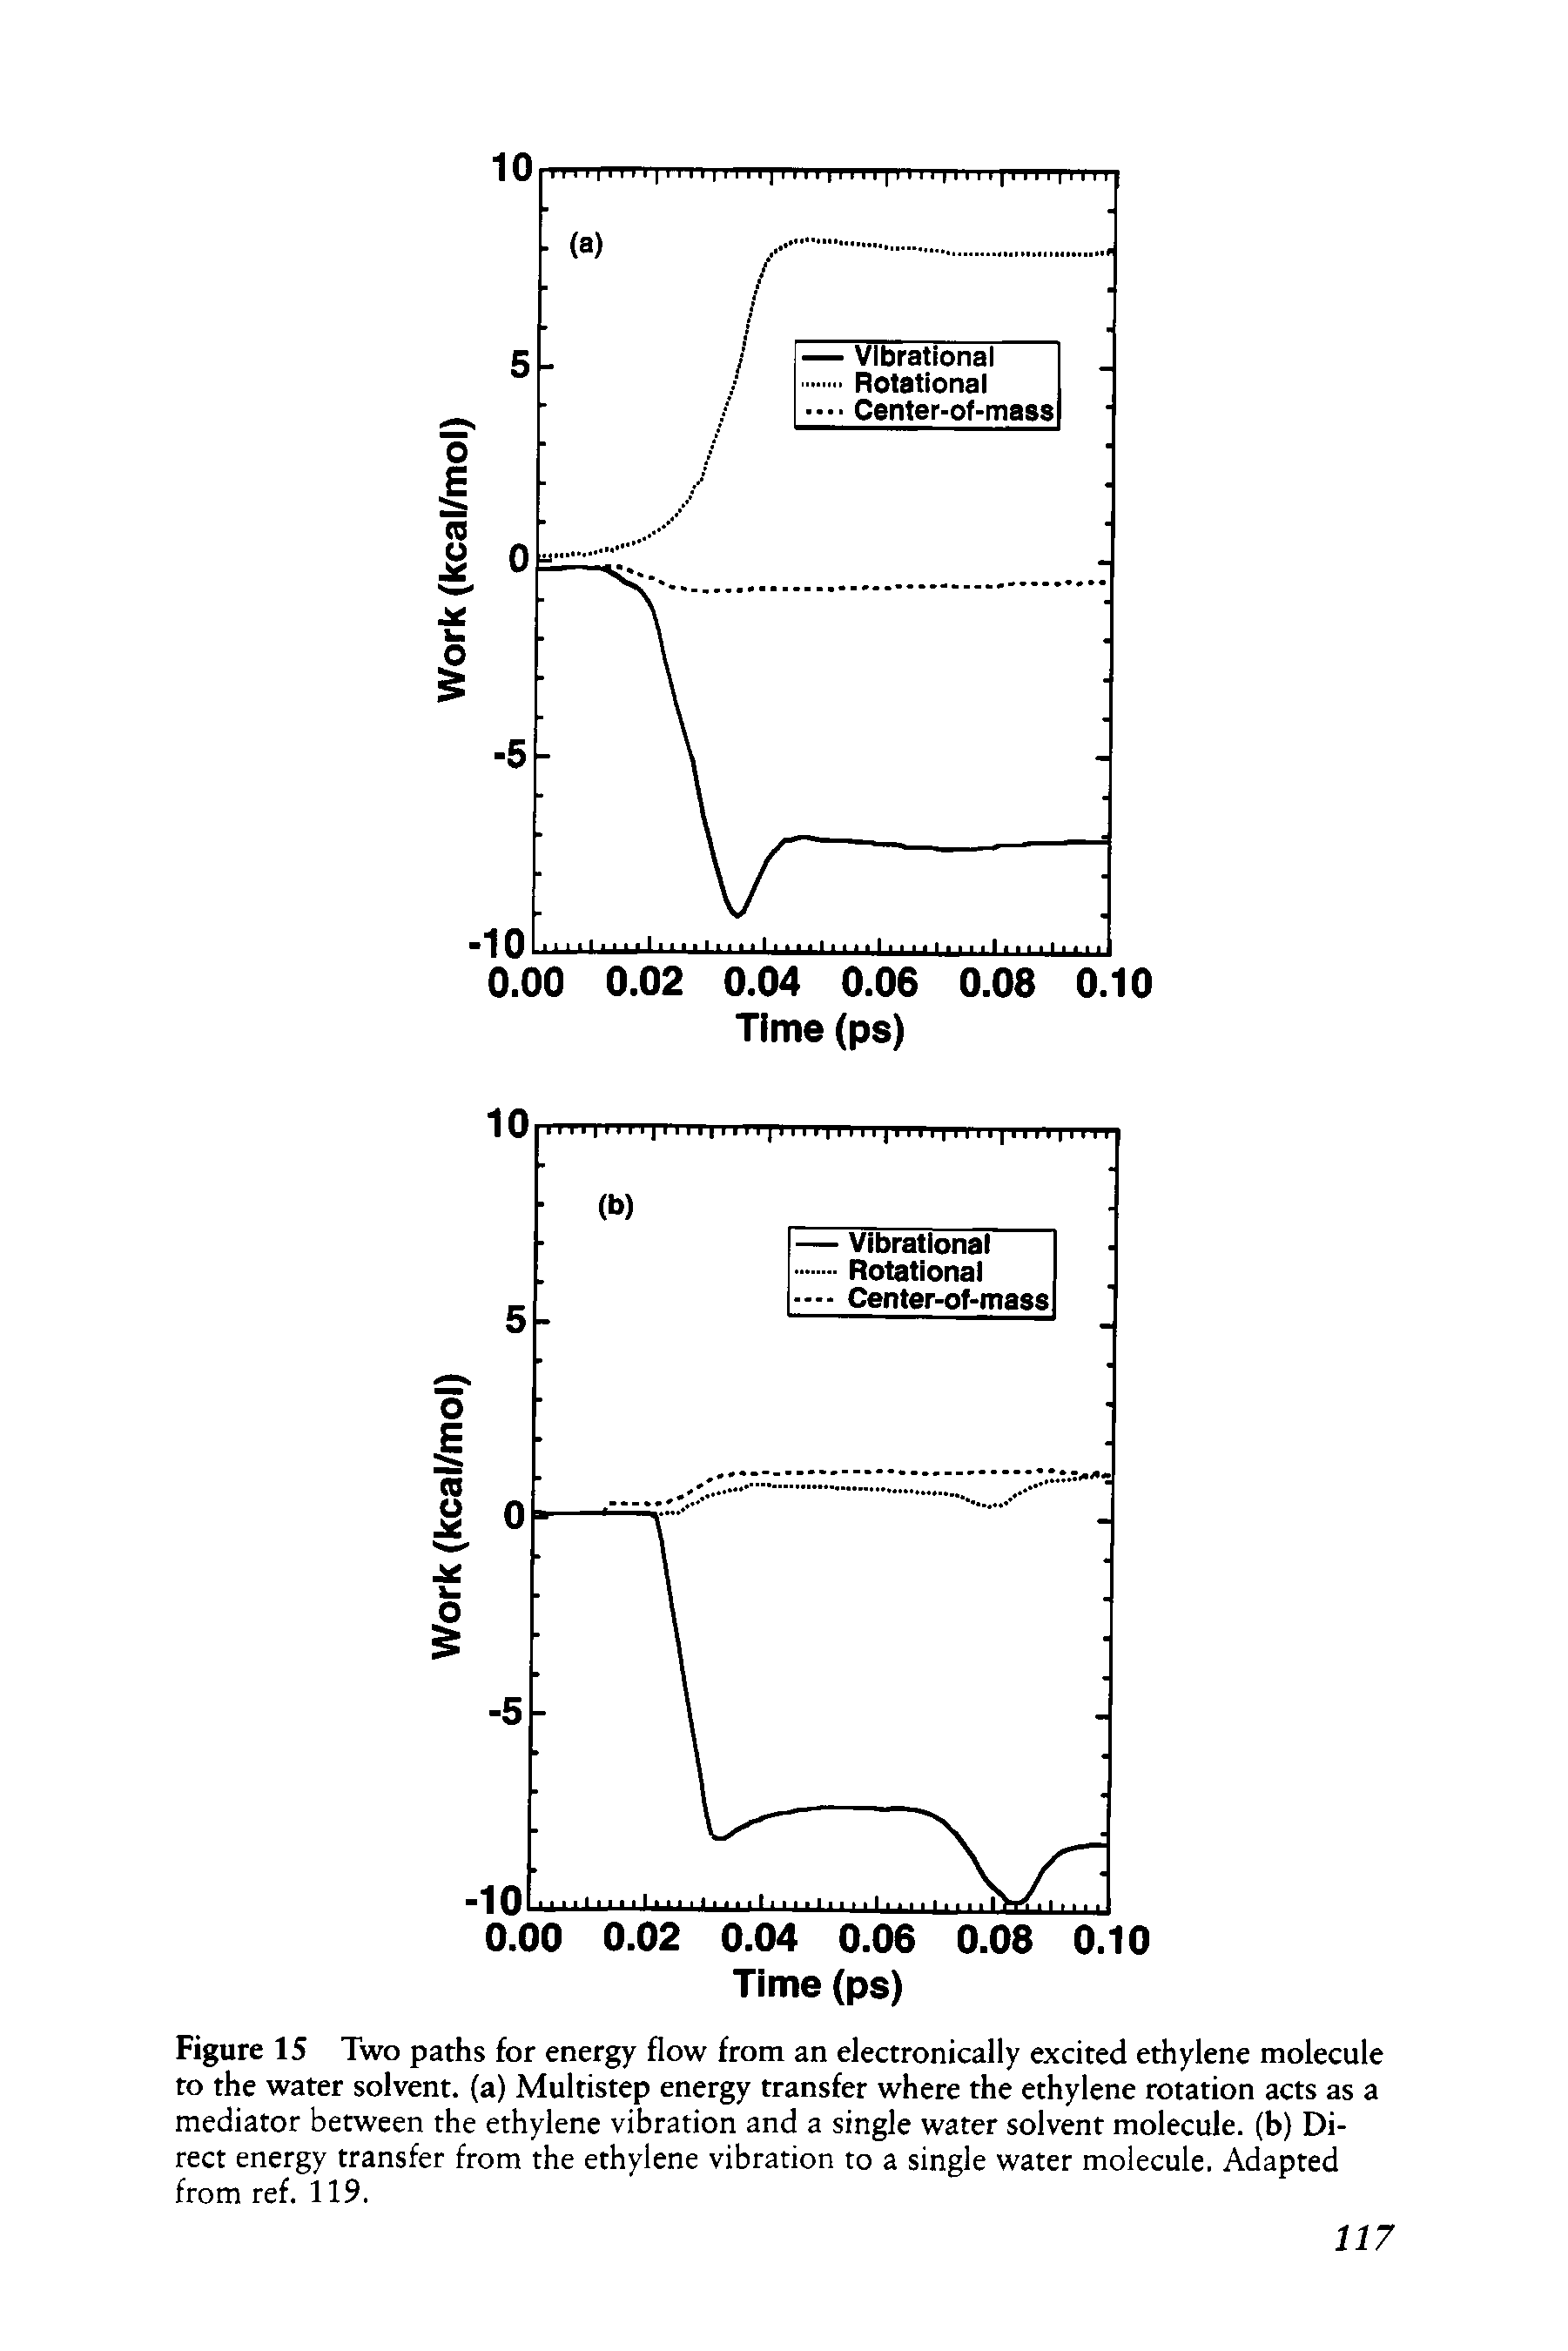 Figure IS Two paths for energy flow from an electronically excited ethylene molecule to the water solvent, (a) Multistep energy transfer where the ethylene rotation acts as a mediator between the ethylene vibration and a single water solvent molecule, (b) Direct energy transfer from the ethylene vibration to a single water molecule. Adapted from ref. 119.